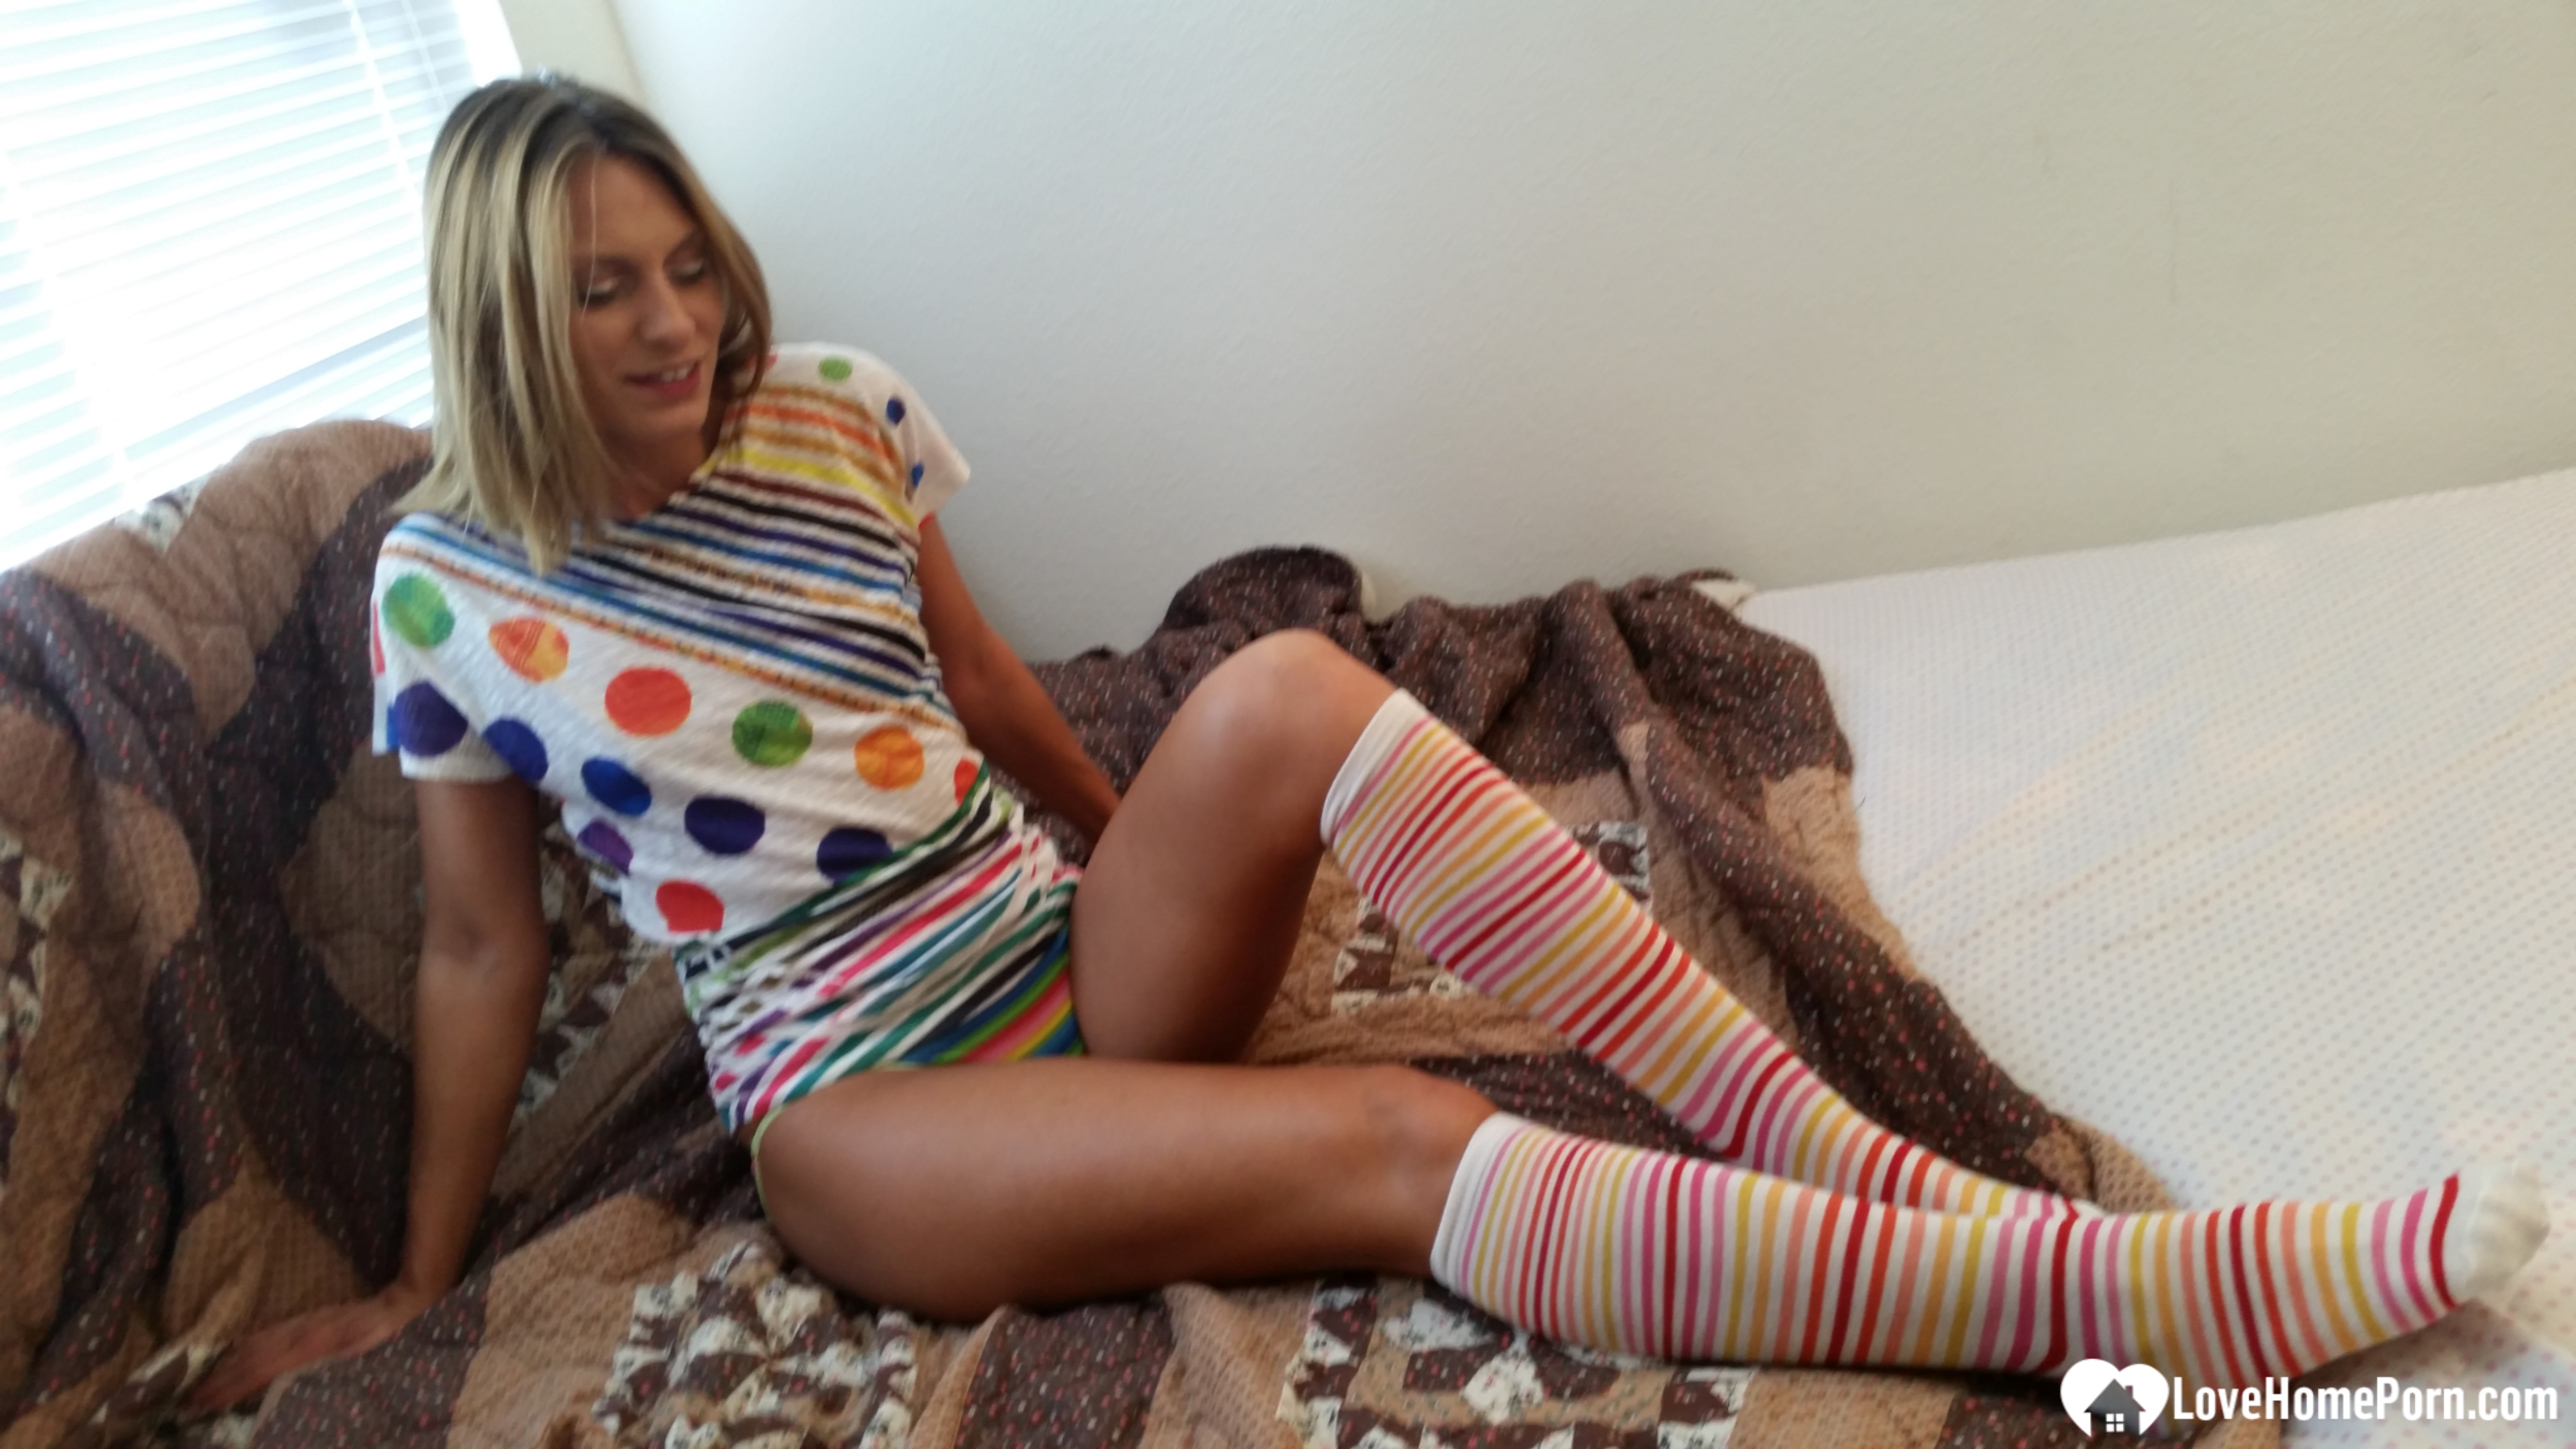 Babe with cute socks shows her dildo skills